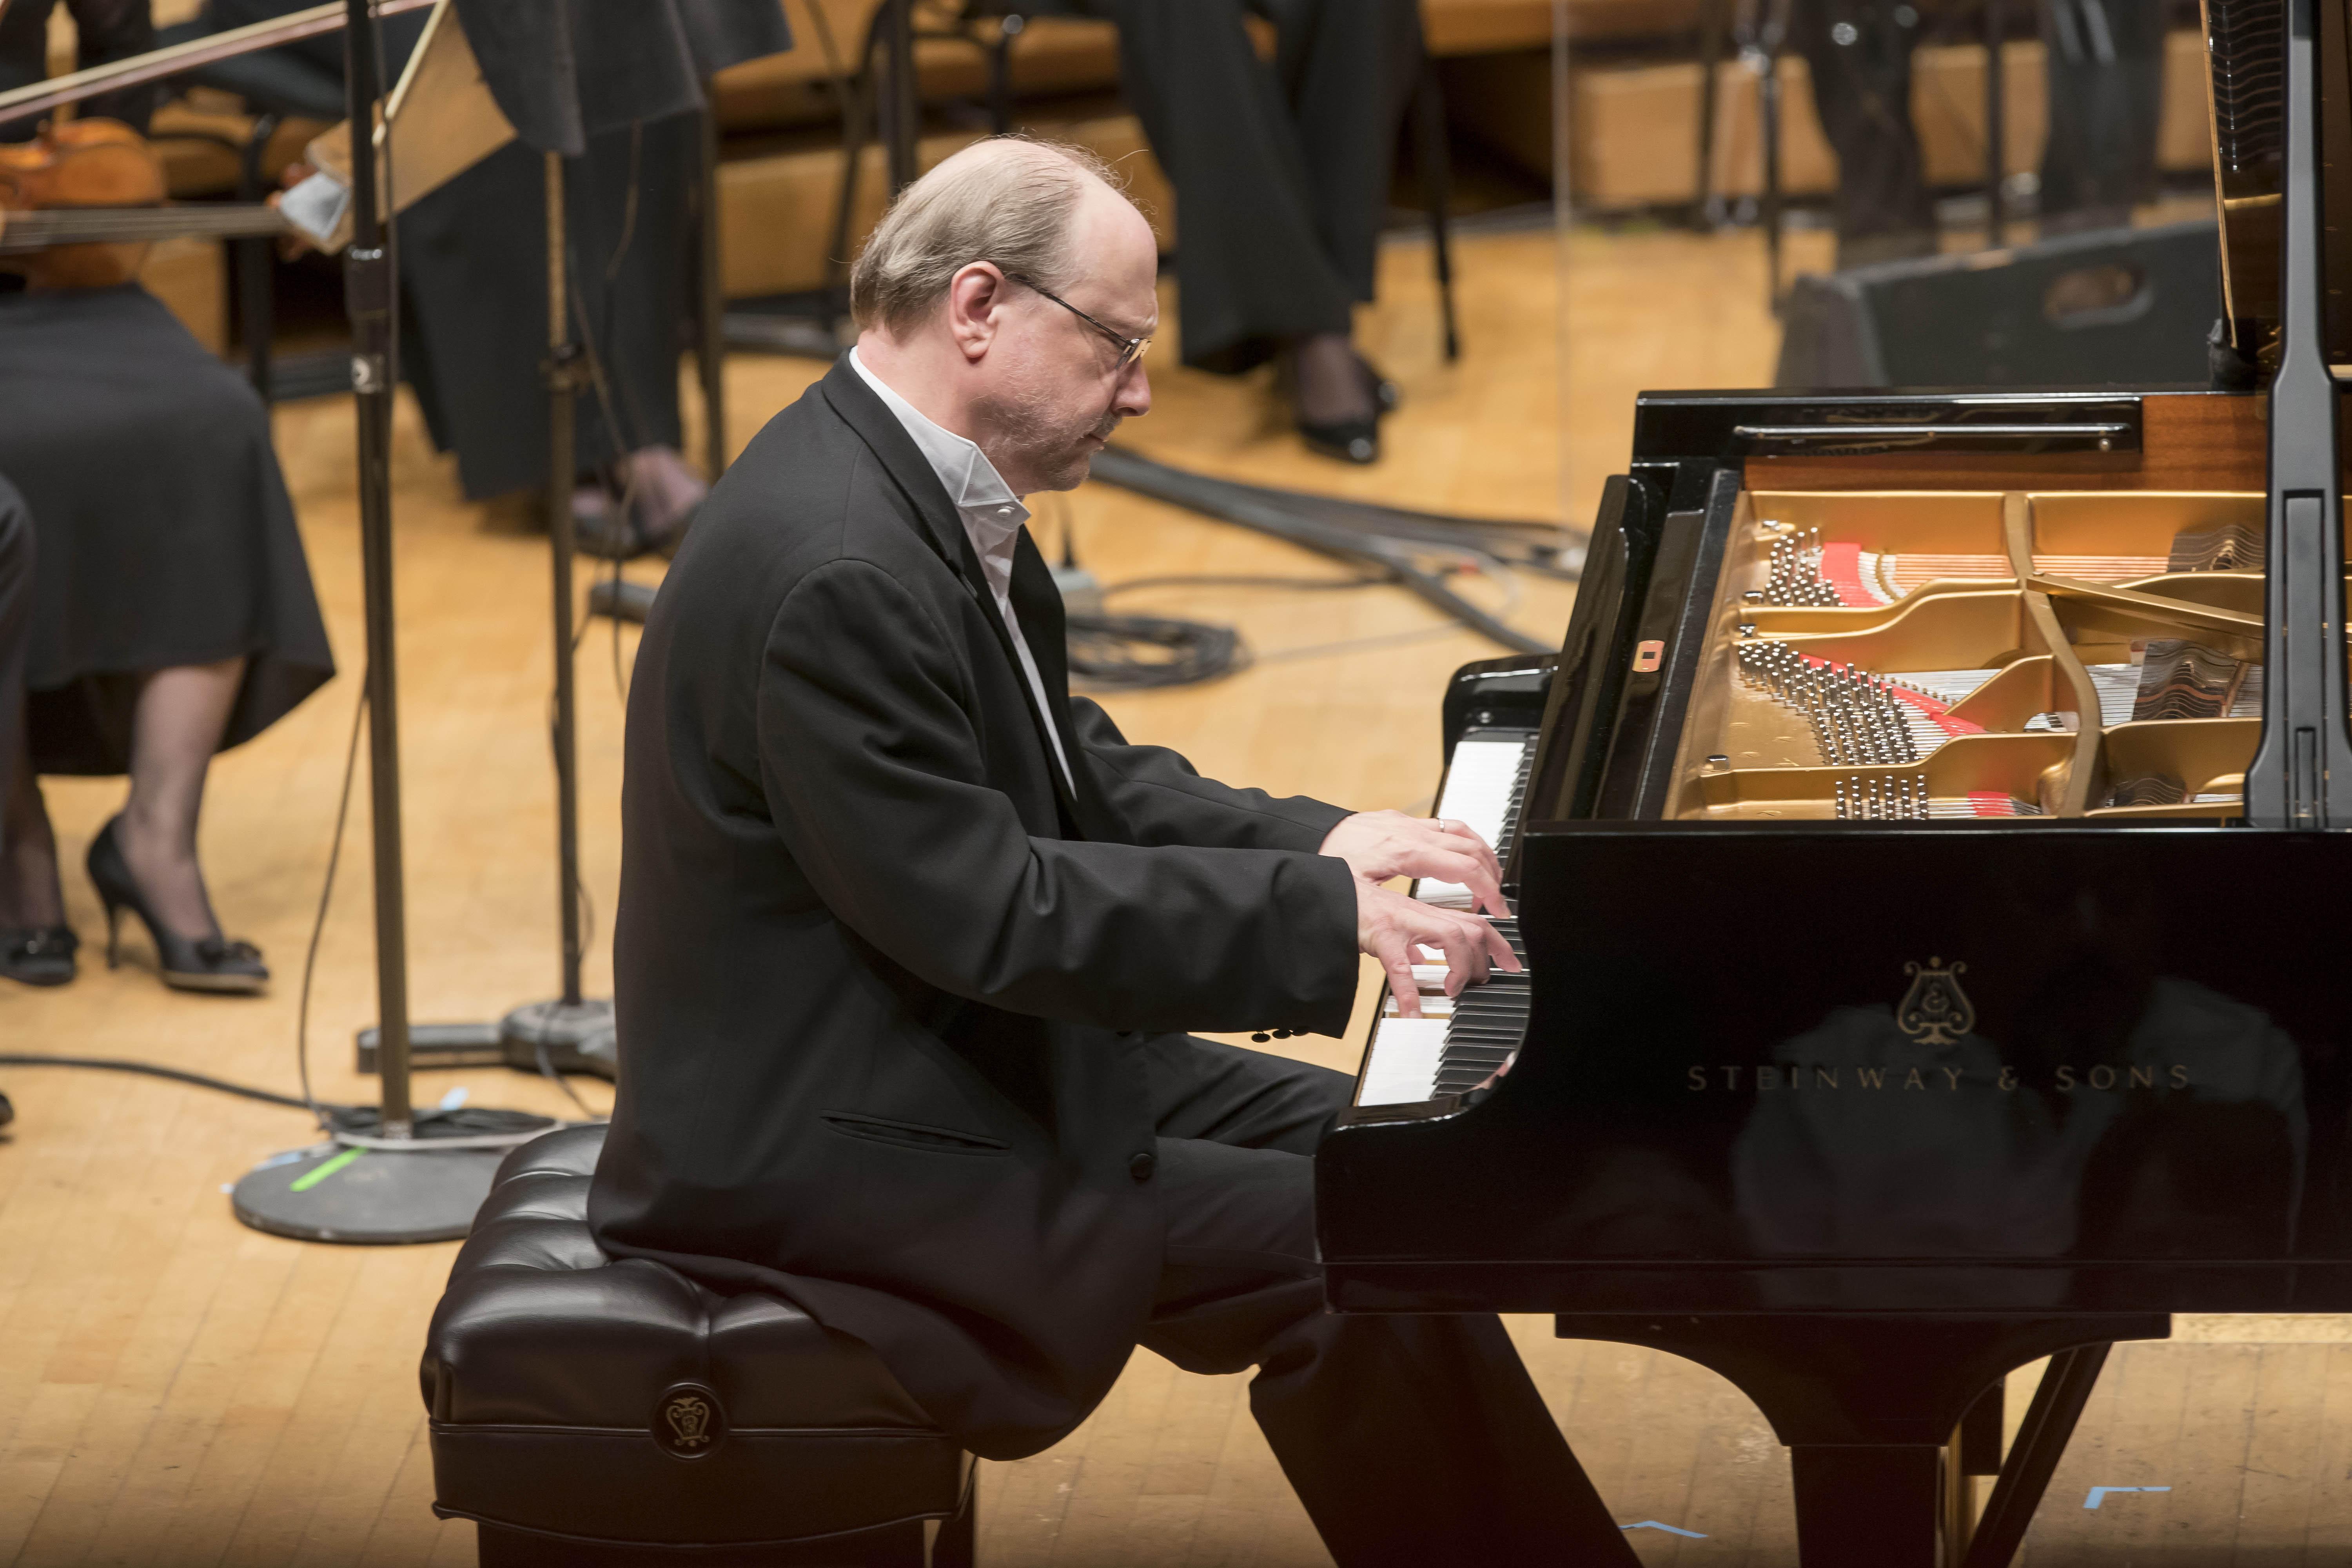 Marc-André Hamelin performed Gershwin’s Rhapsody in Blue with the Chicago Symphony Orchestra for the CSOA’s 29th annual Corporate Night Concert on June 11, 2018. (Credit: Todd Rosenberg)